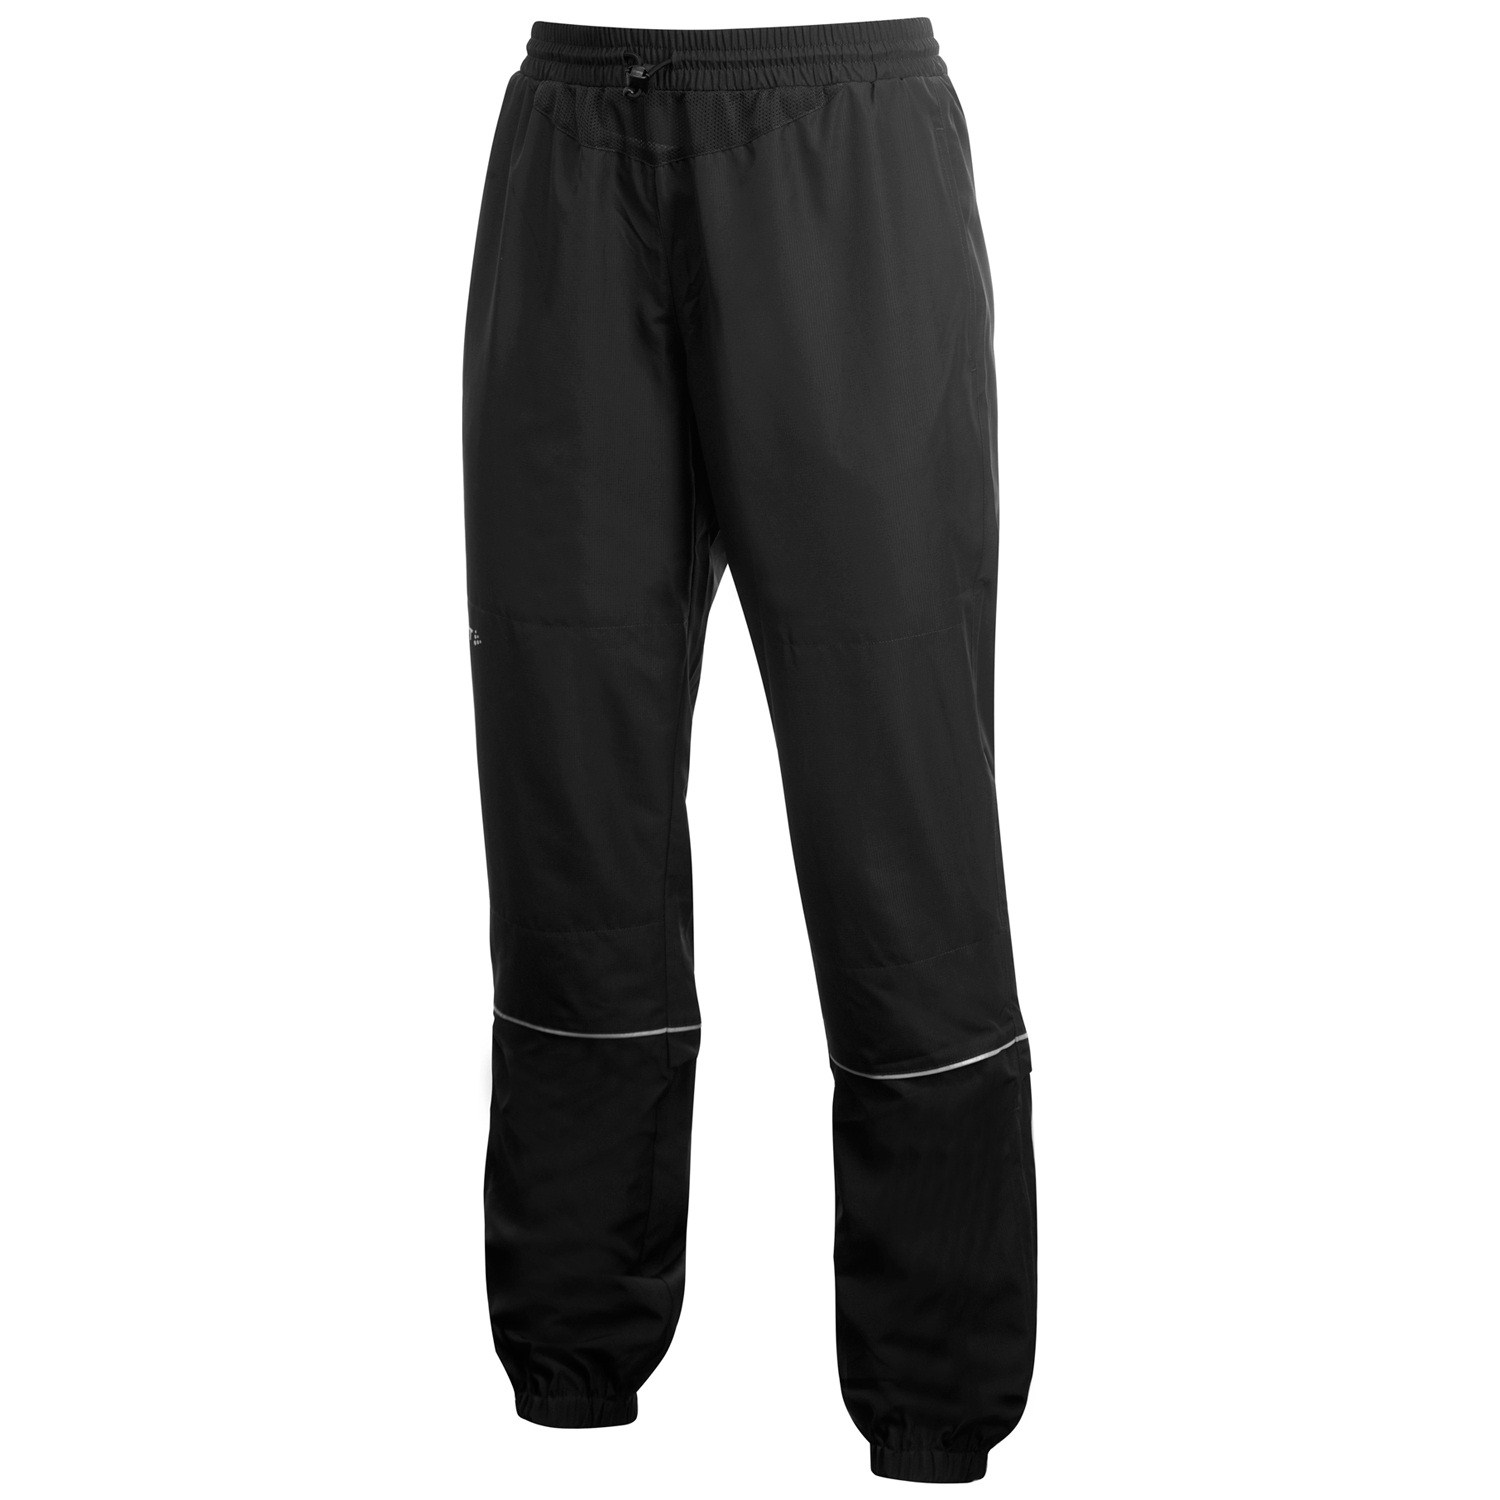 Craft AR Pant Women - Pants - Athletic apparel - Sport - Timarco.co.uk